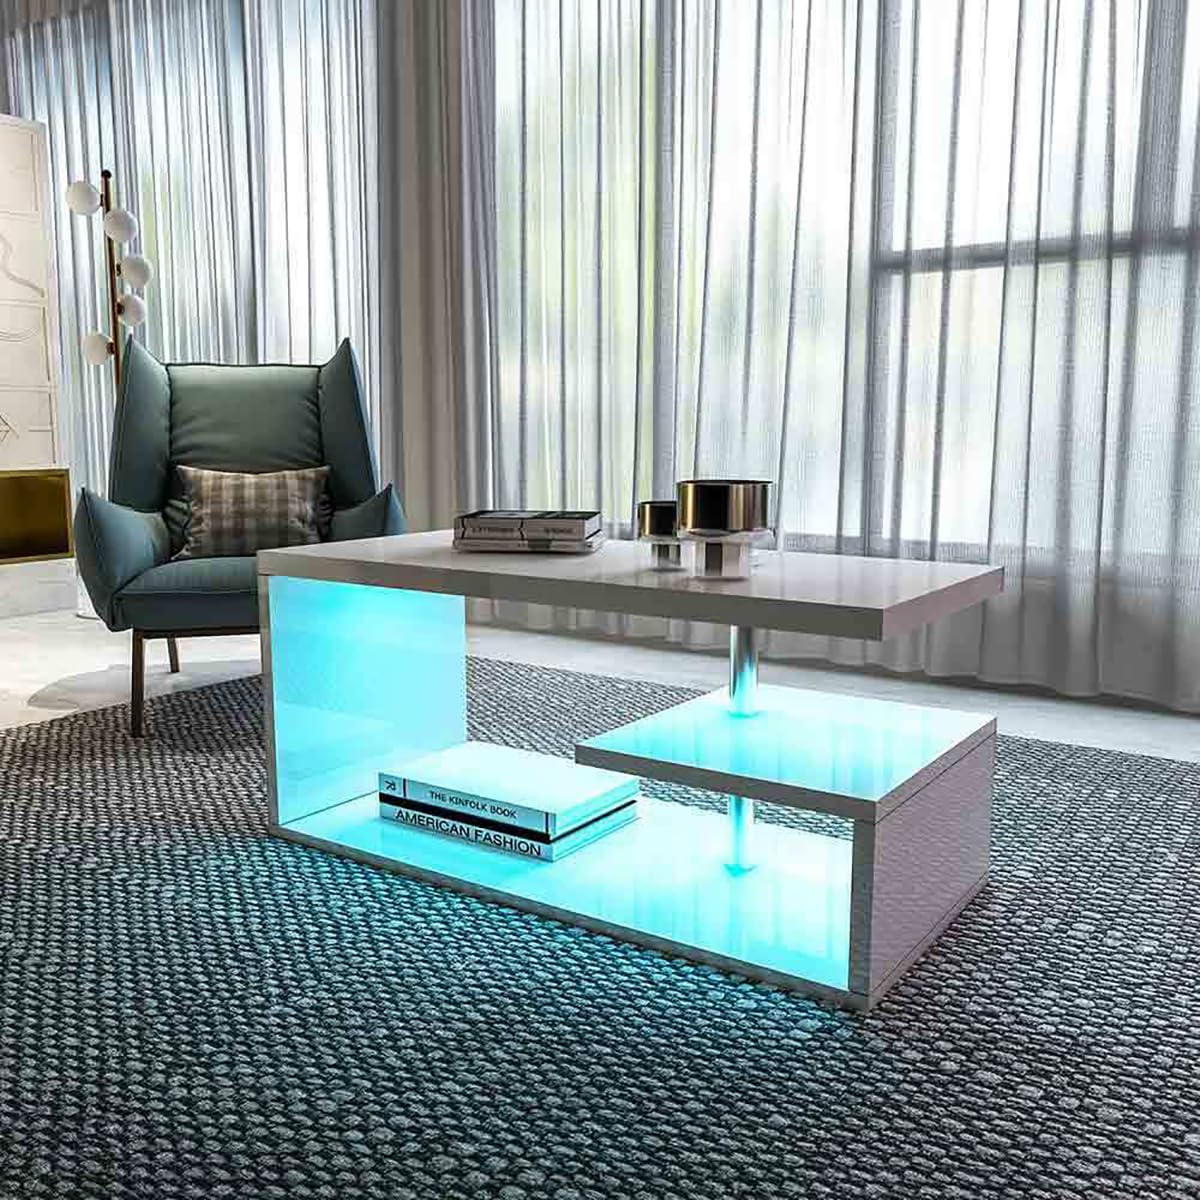 HOMMPA LED Coffee Tables for Living Room Modern White Coffee Table with S-Shaped 3 Tiers Open Storage Shelf High Gloss Center Sofa Tea Table with LED Lights for Home Office Furniture White 18" Tall